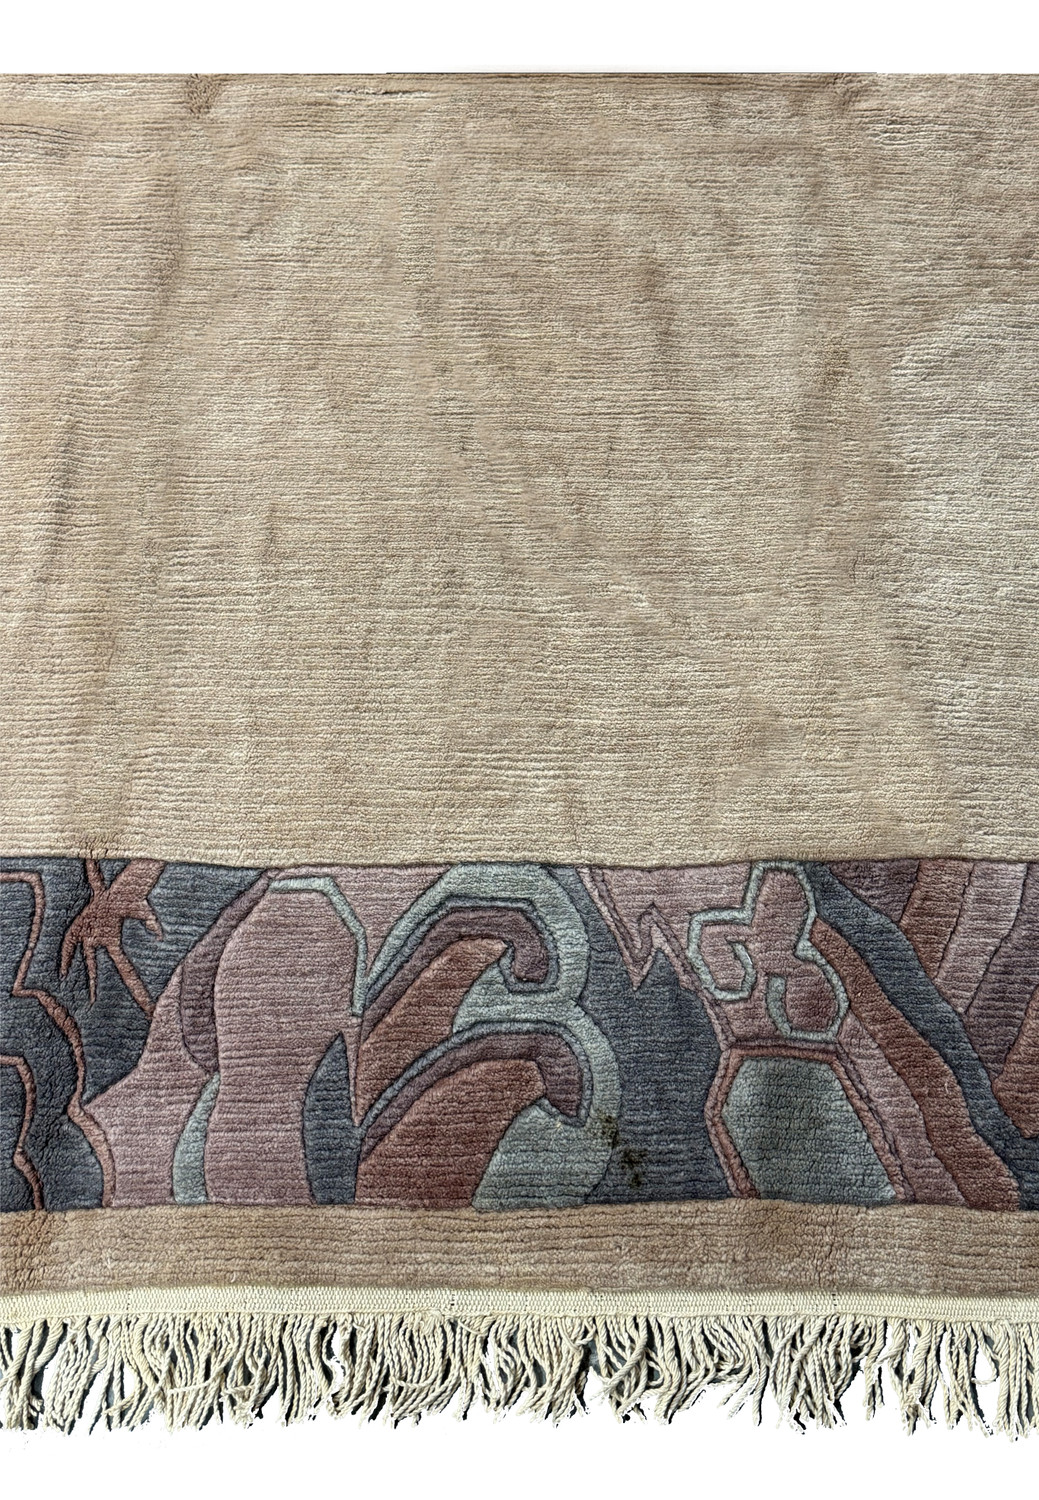 Close-up view of the Modern Royal Tibetan rug's border pattern and color details.